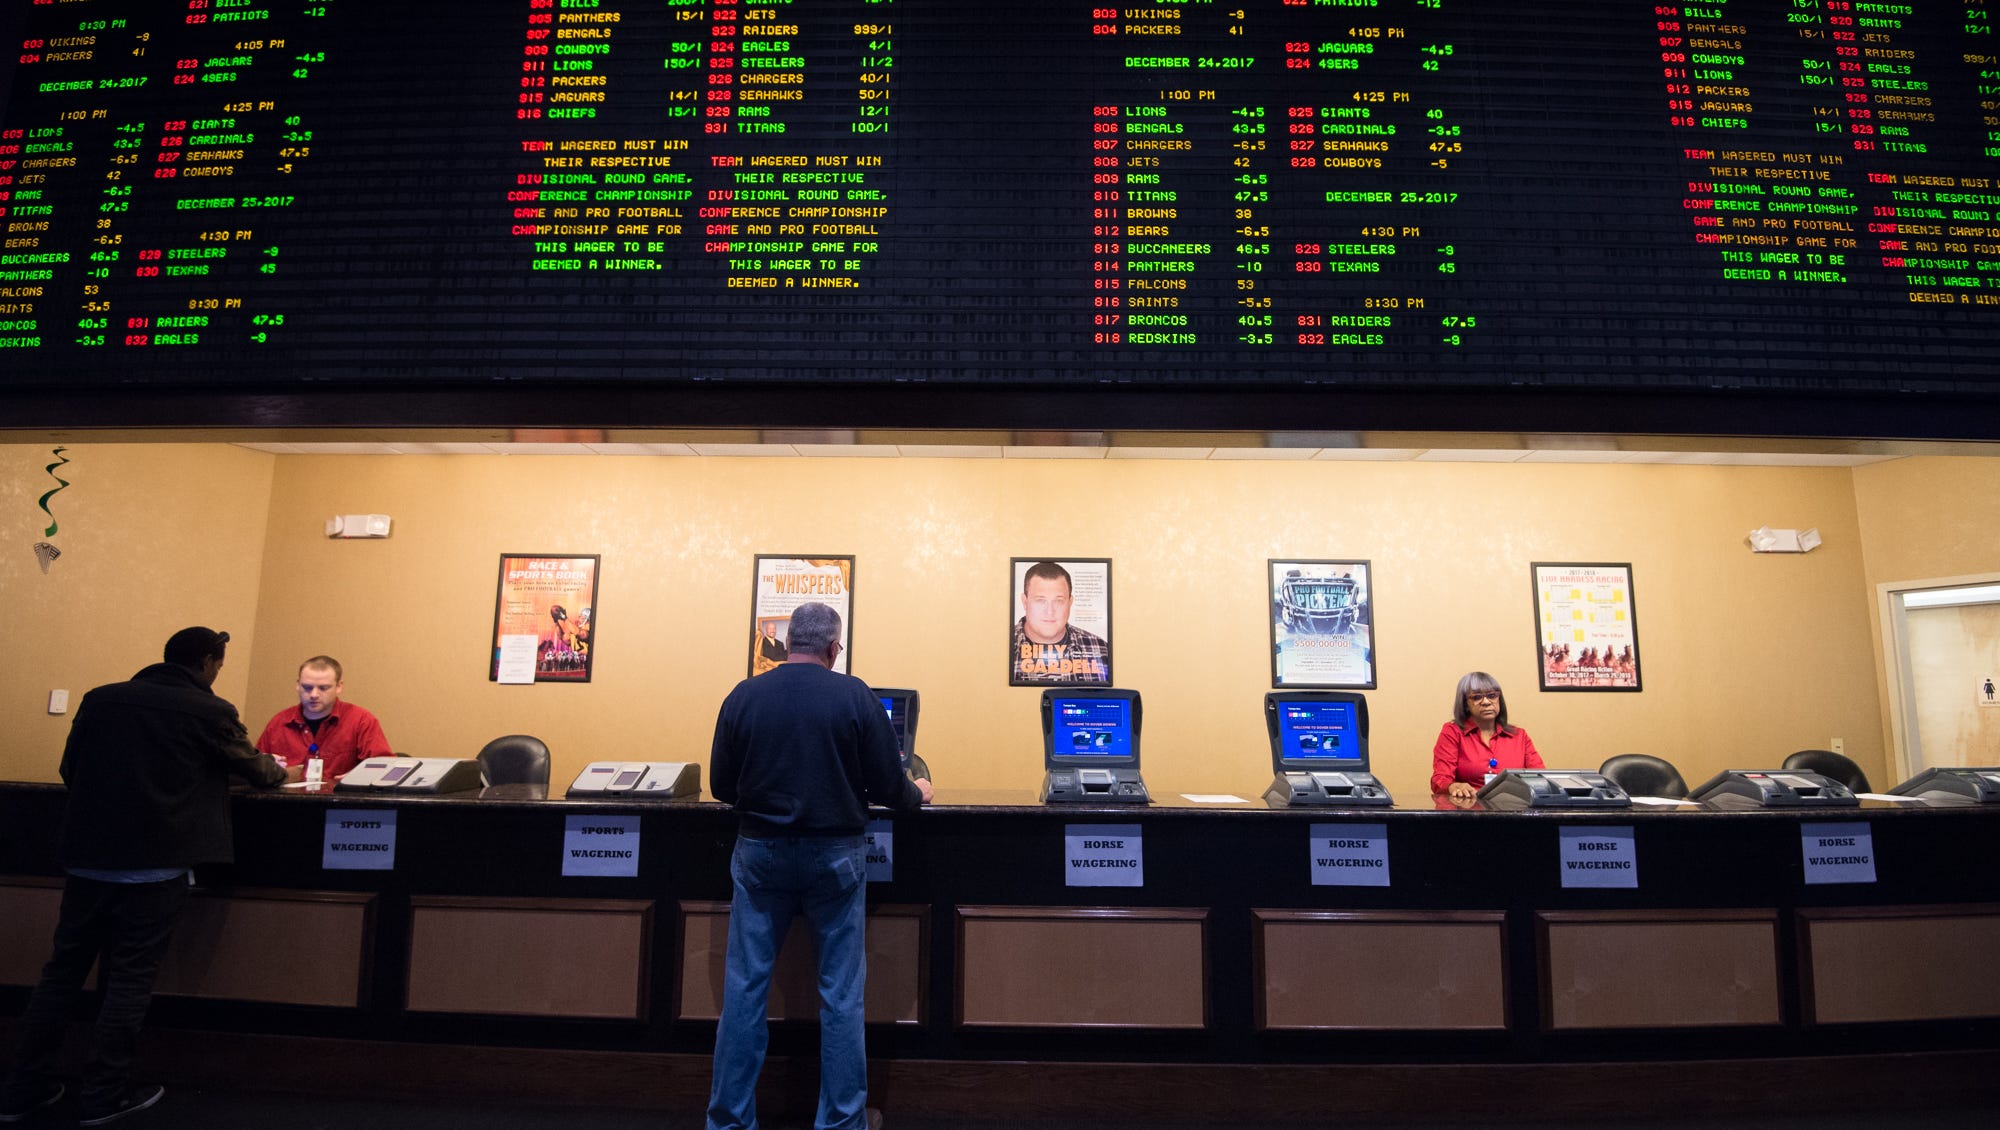 Single-game Delaware sports betting starts Tuesday